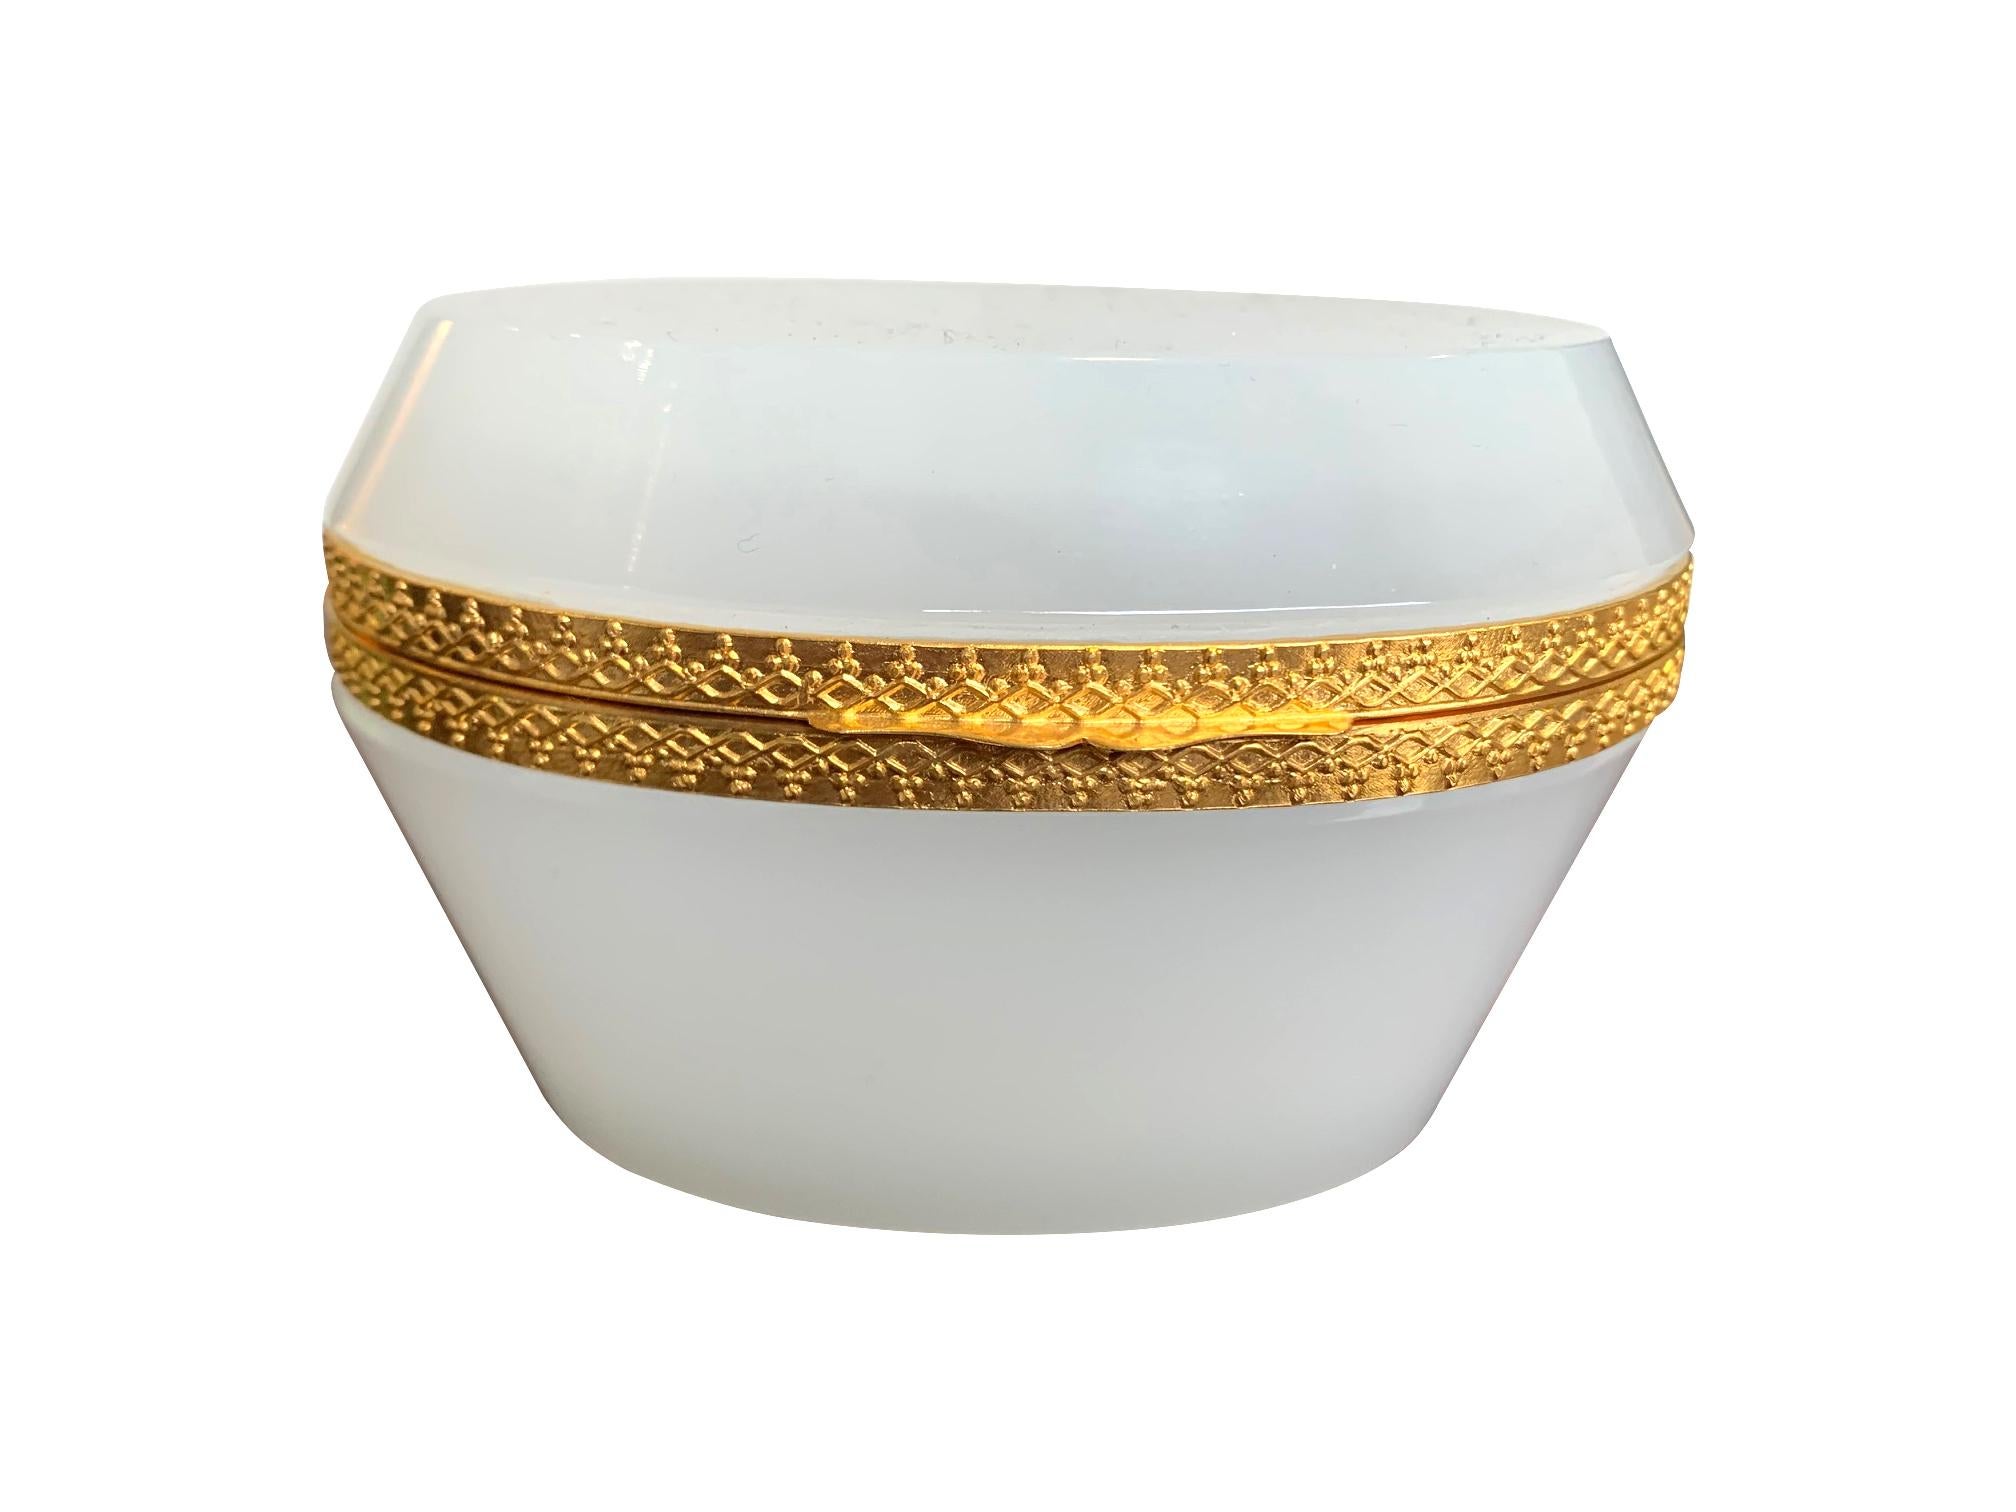 A stunning oval white Murano glass hinged jewelry box by Giovanni Cendese, Murano, Italy with gilt central detail and hinge.

                  